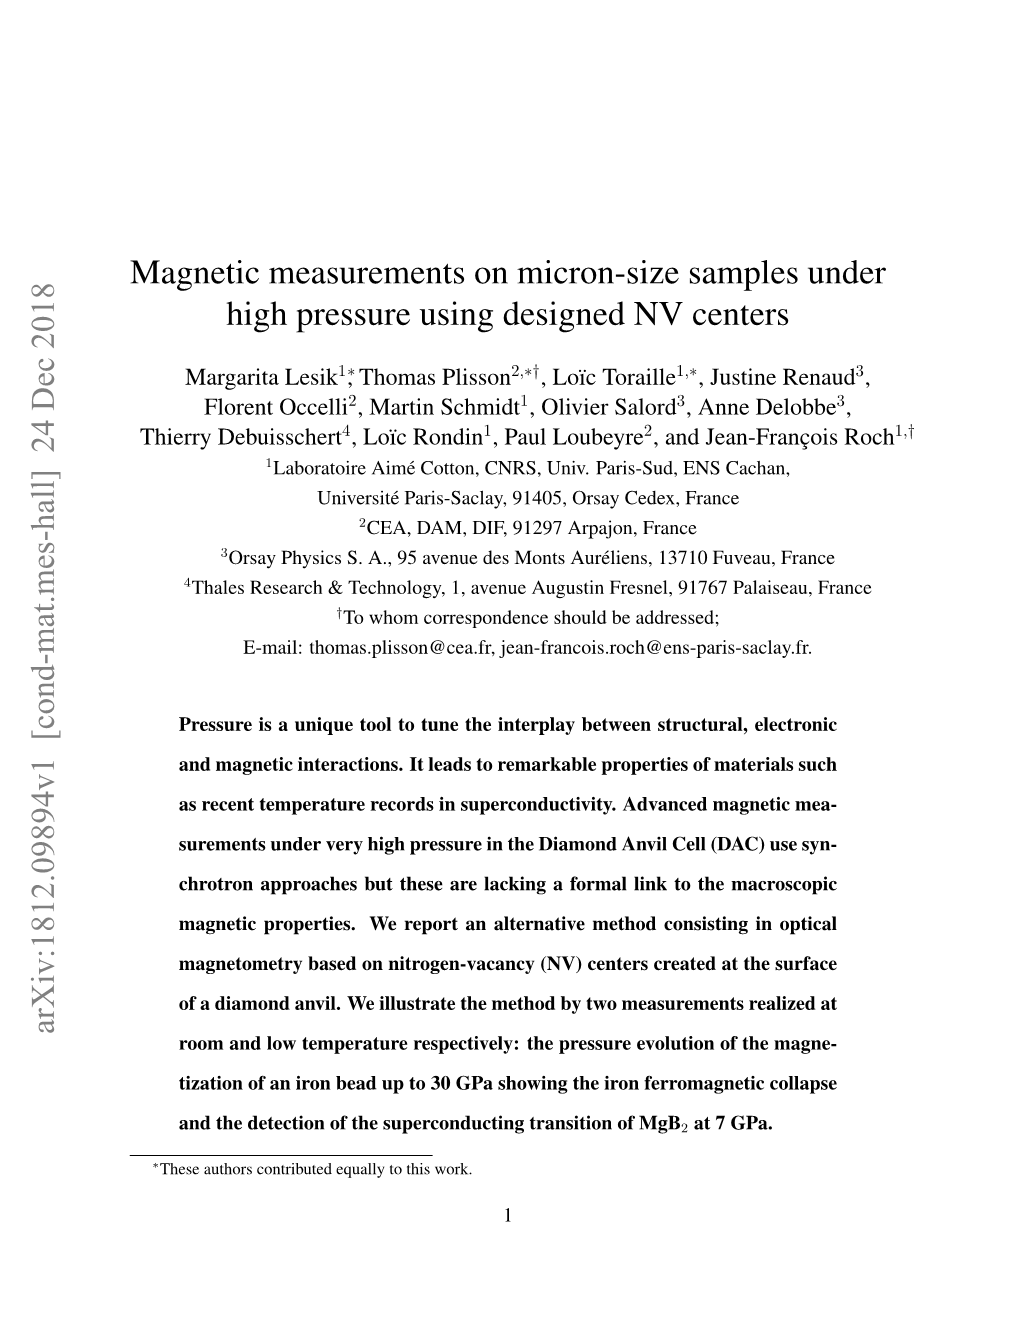 Magnetic Measurements on Micron-Size Samples Under High Pressure Using Designed NV Centers